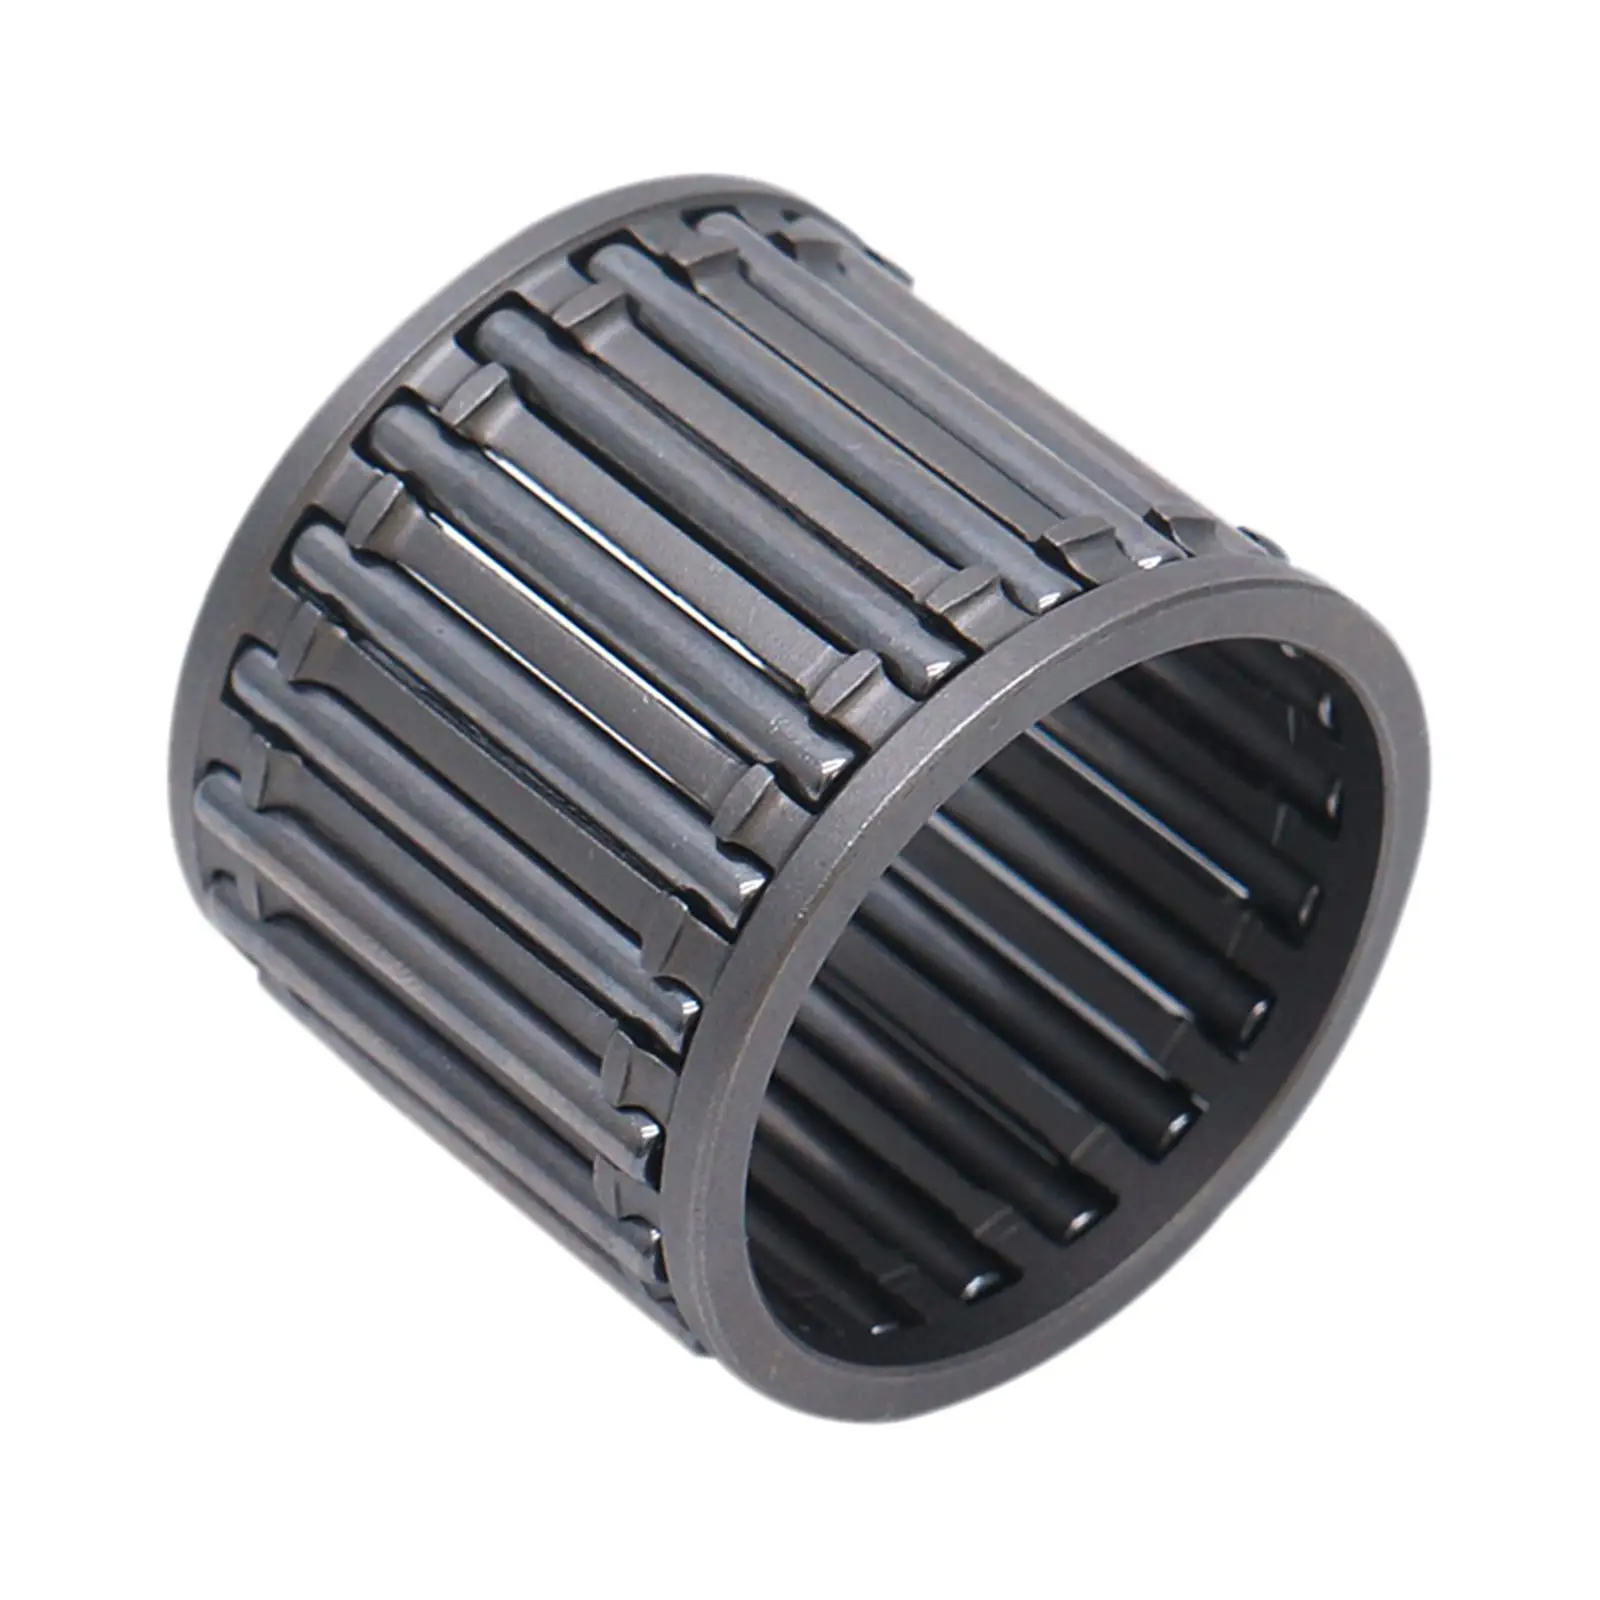 High 3310-326V4 Replaces 26mm Needle Bearing New Wrist Pin Bearing Fit for  Outboard Motor 22550HP 93310-326V4-00